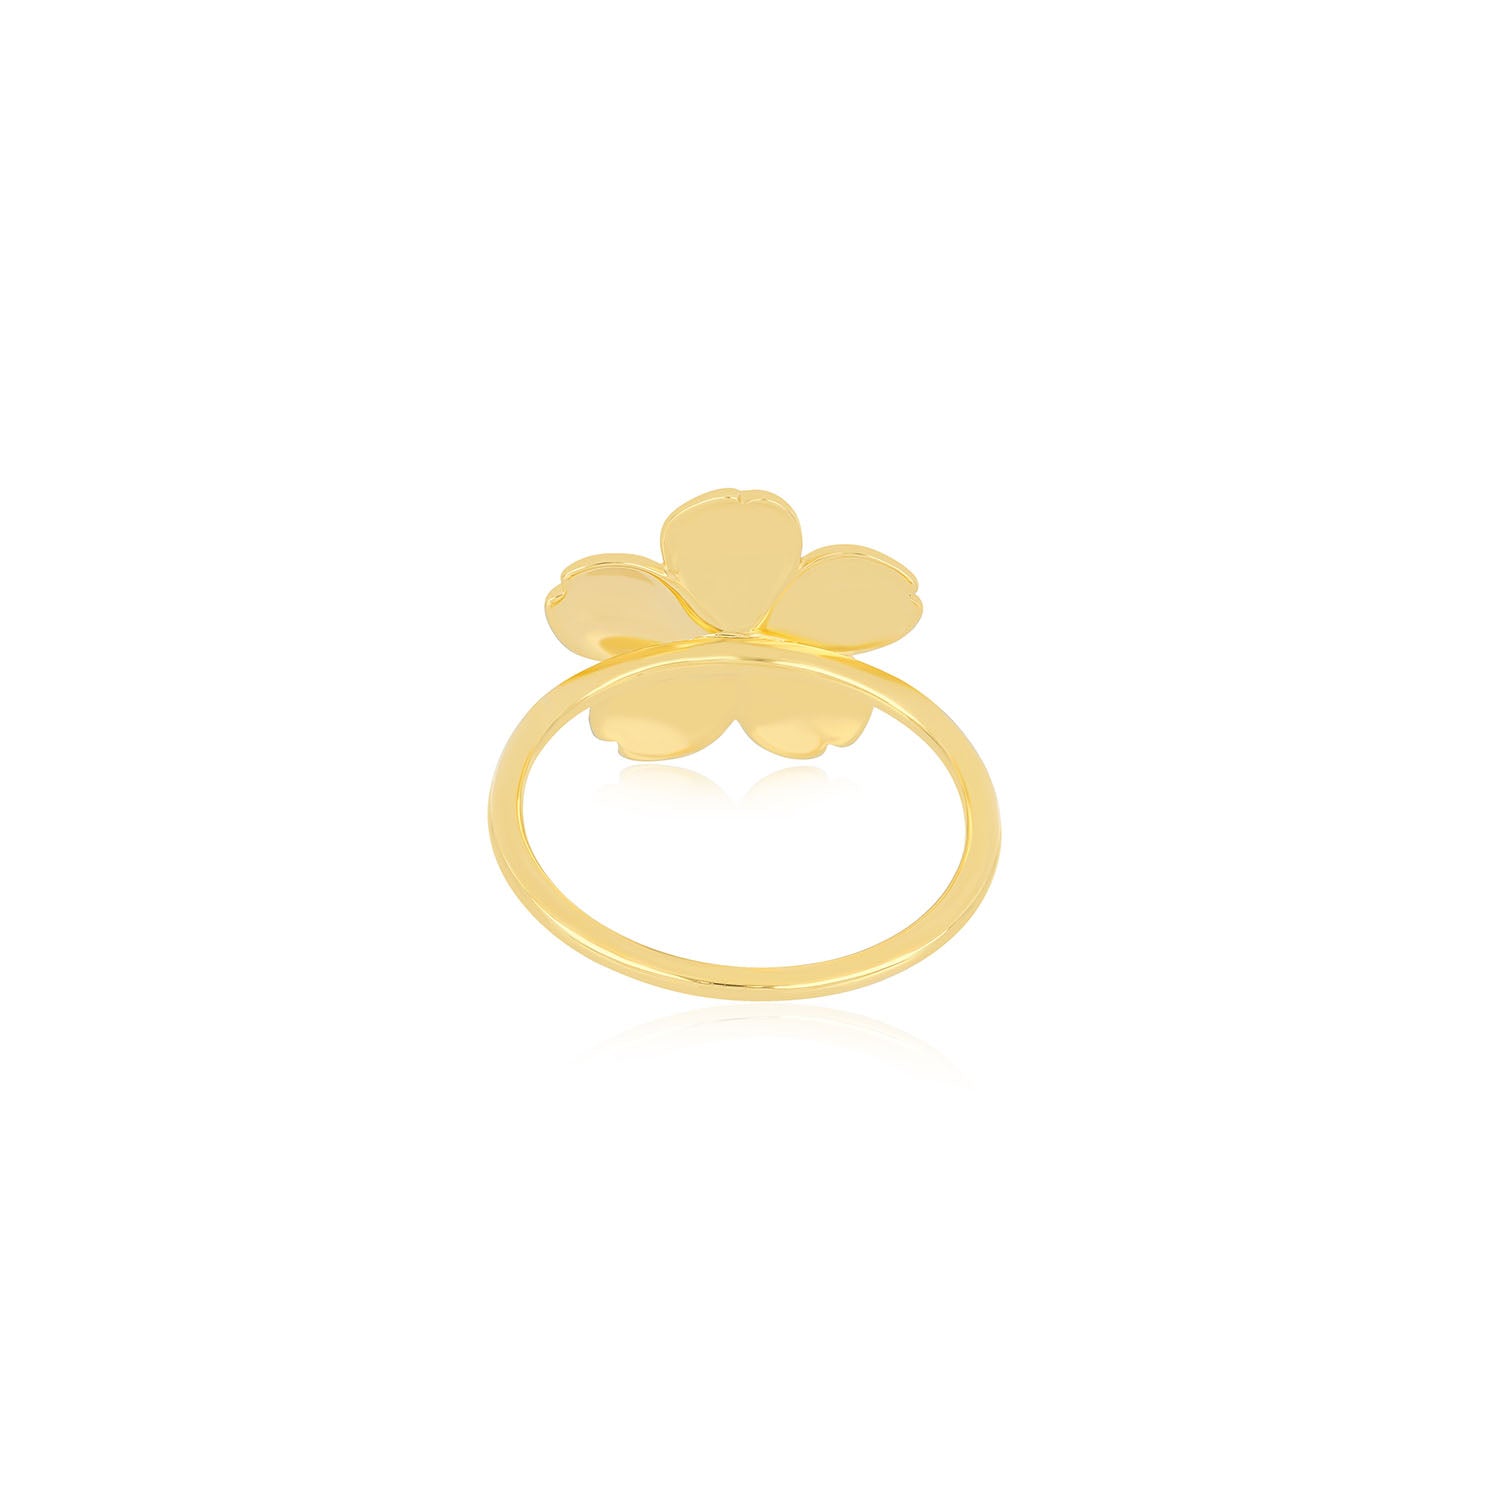 Cherry Blossom Ring in 14k yellow gold back view